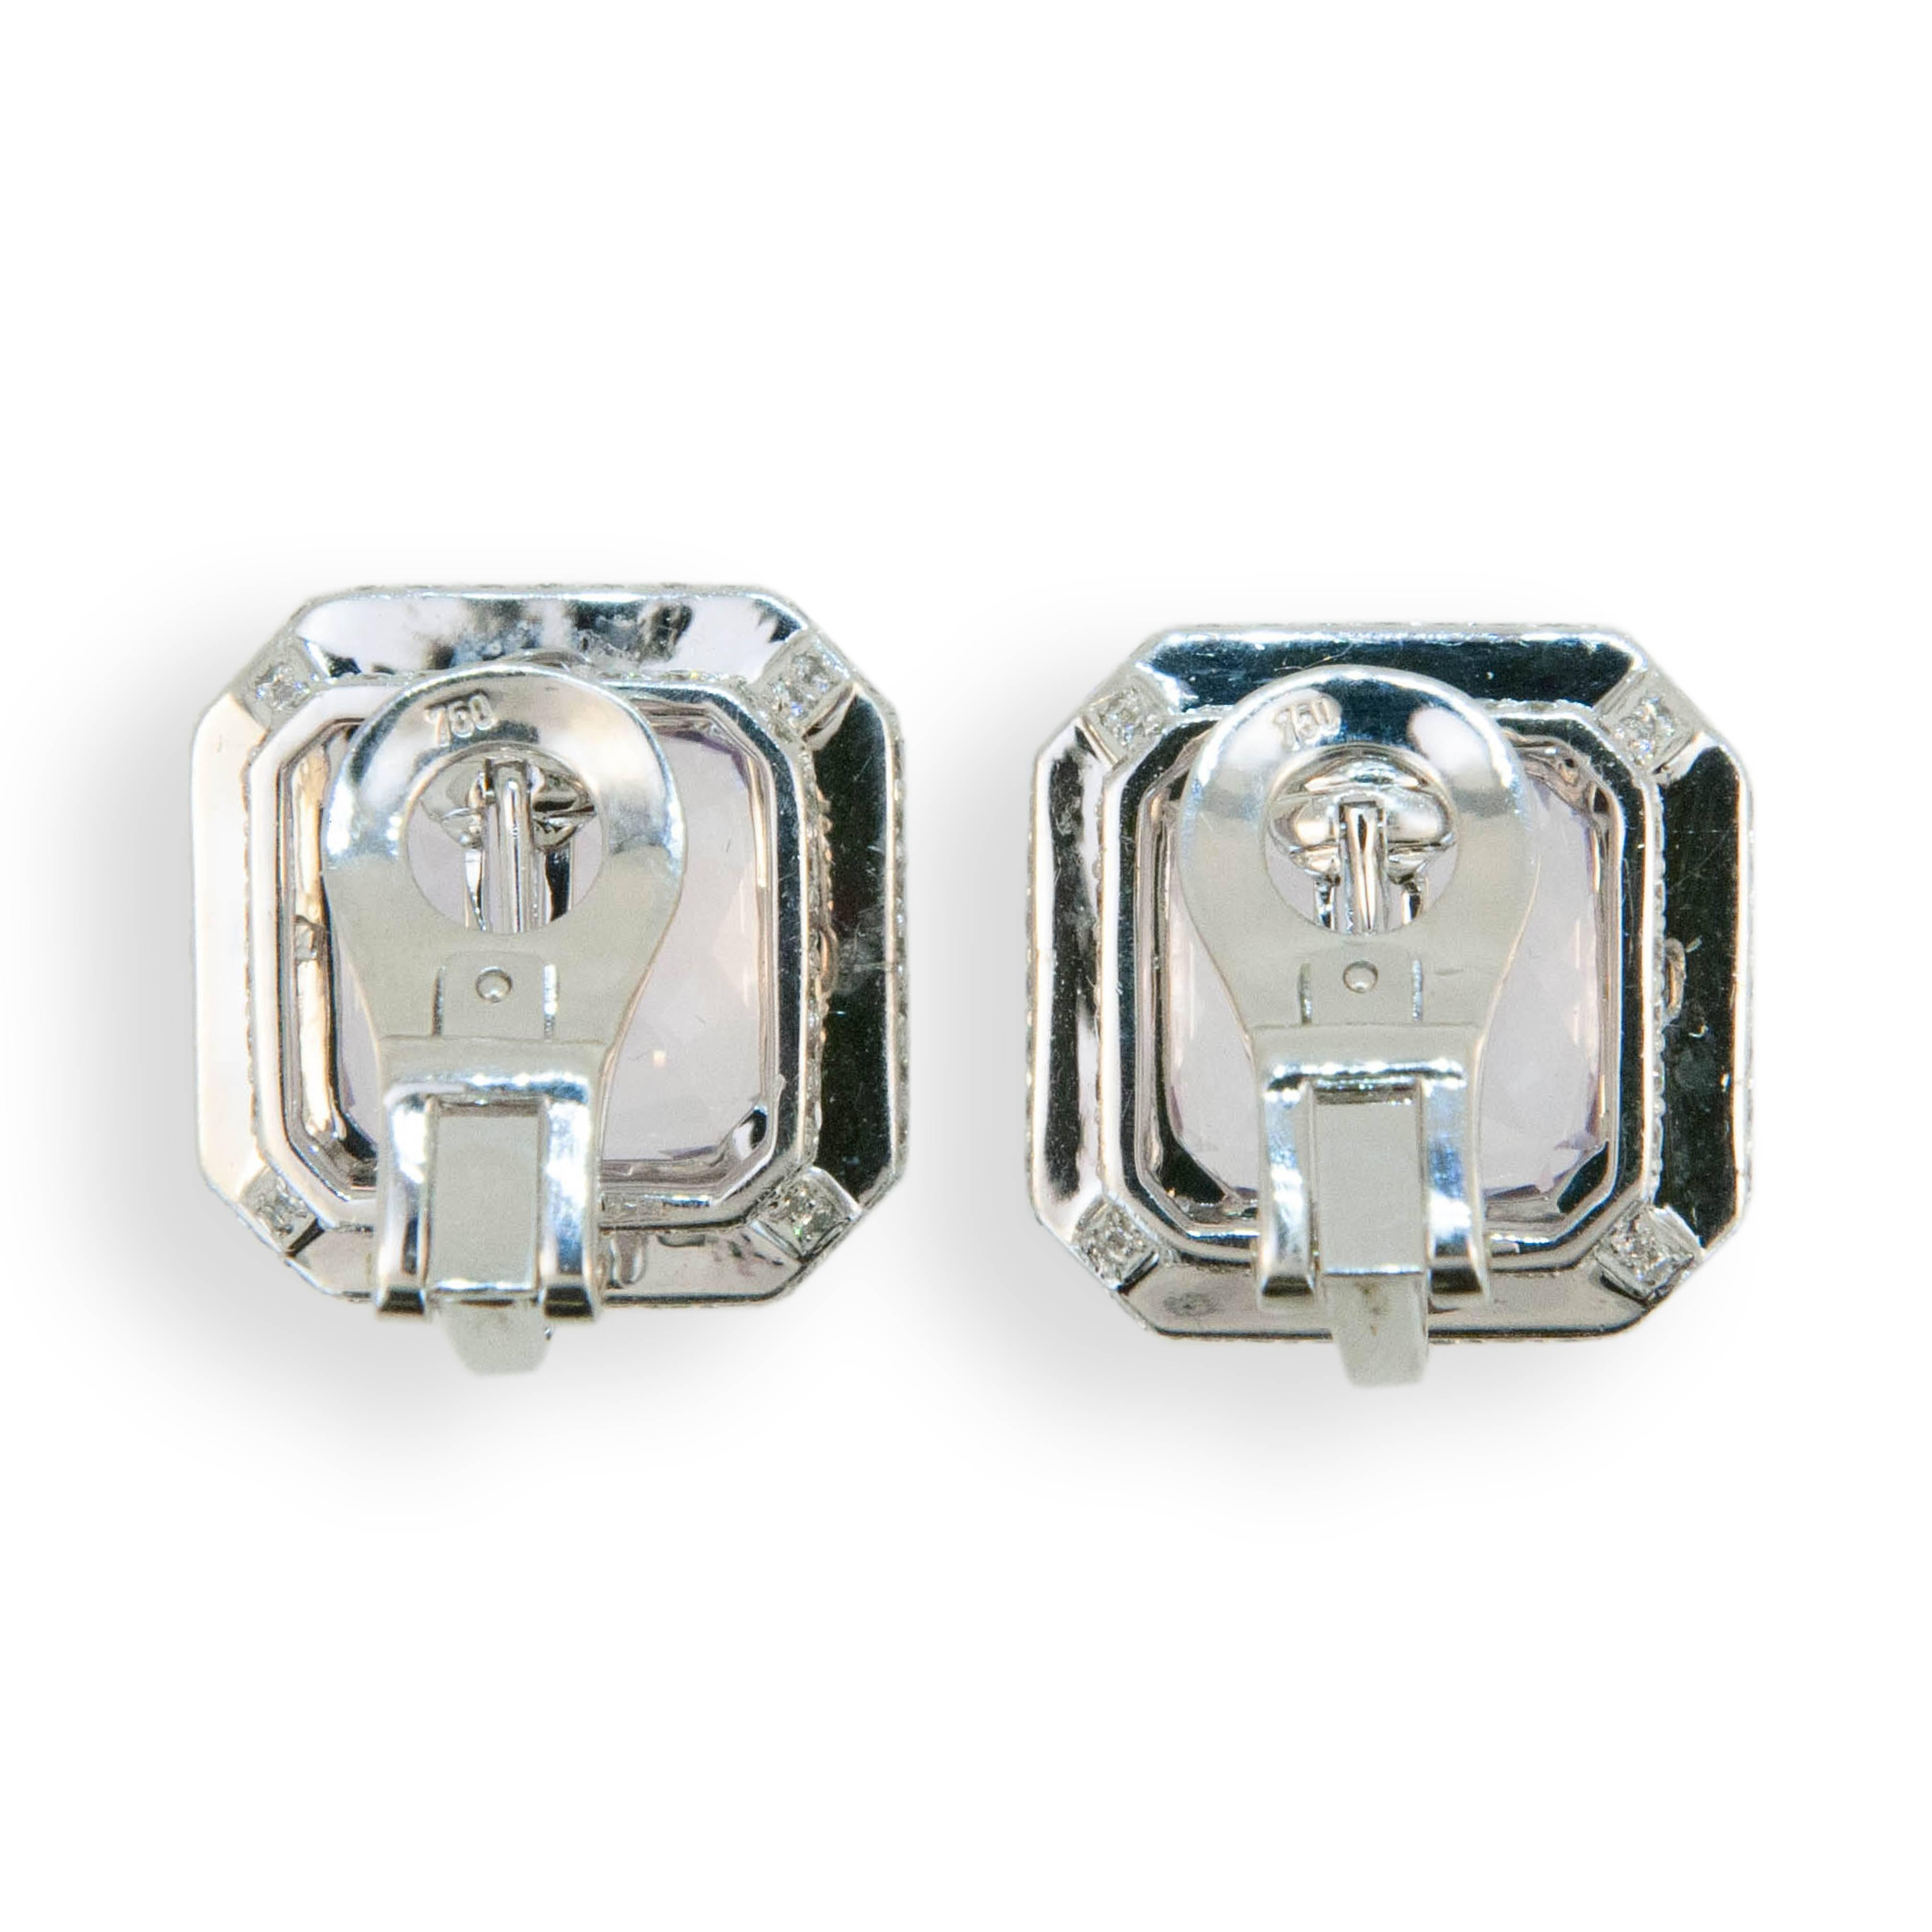 18 karat white gold earrings set with octagonal Kunzite 21.83 carats total weight and micro-set with 232 round diamonds 1.93 carats total weight. Earrings may be worn as clips or pierced, posts fold down.